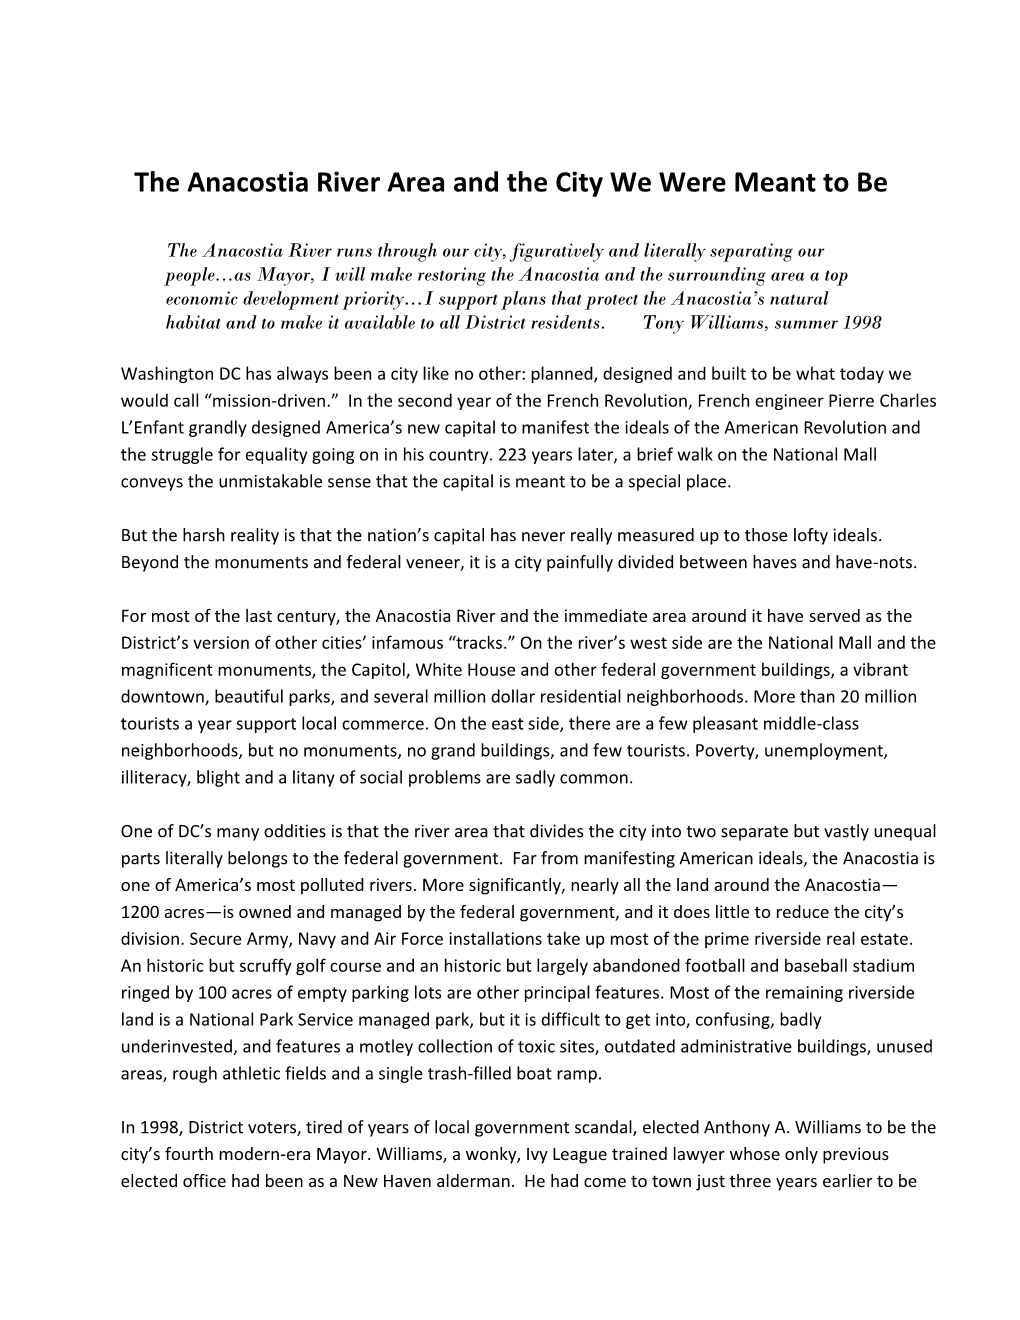 The Anacostia River Area and the City We Were Meant to Be